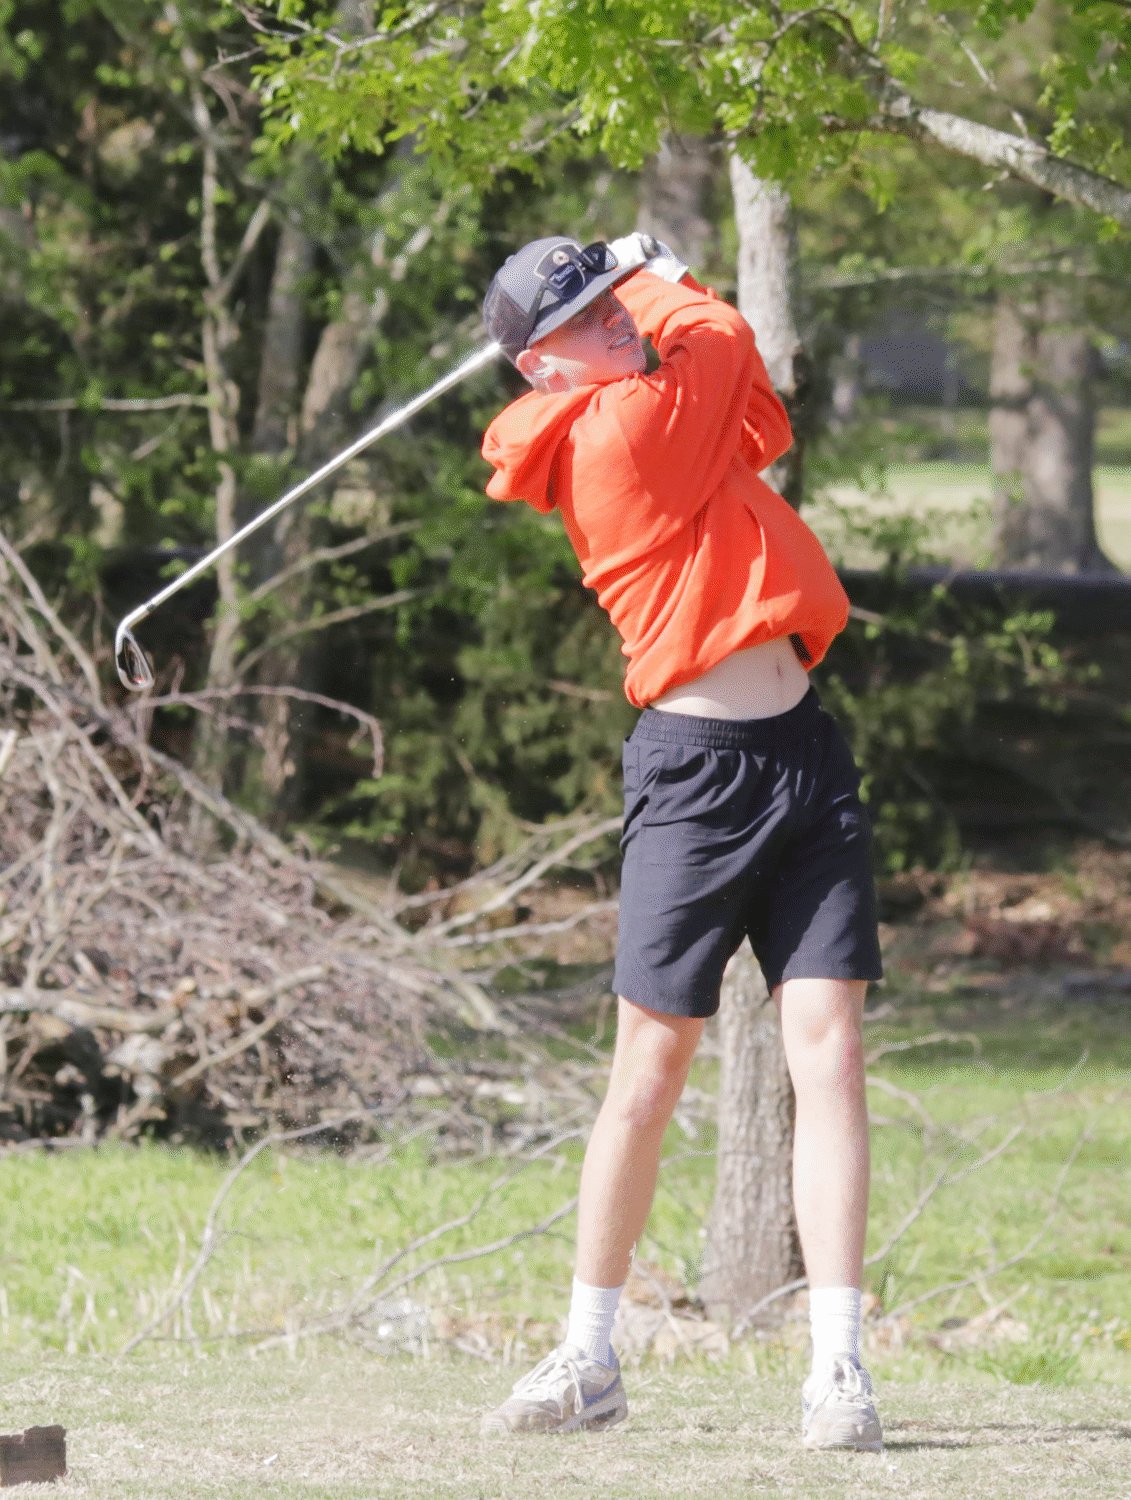 Patrick Spofford sends a ball downrange for the Yellowjackets.